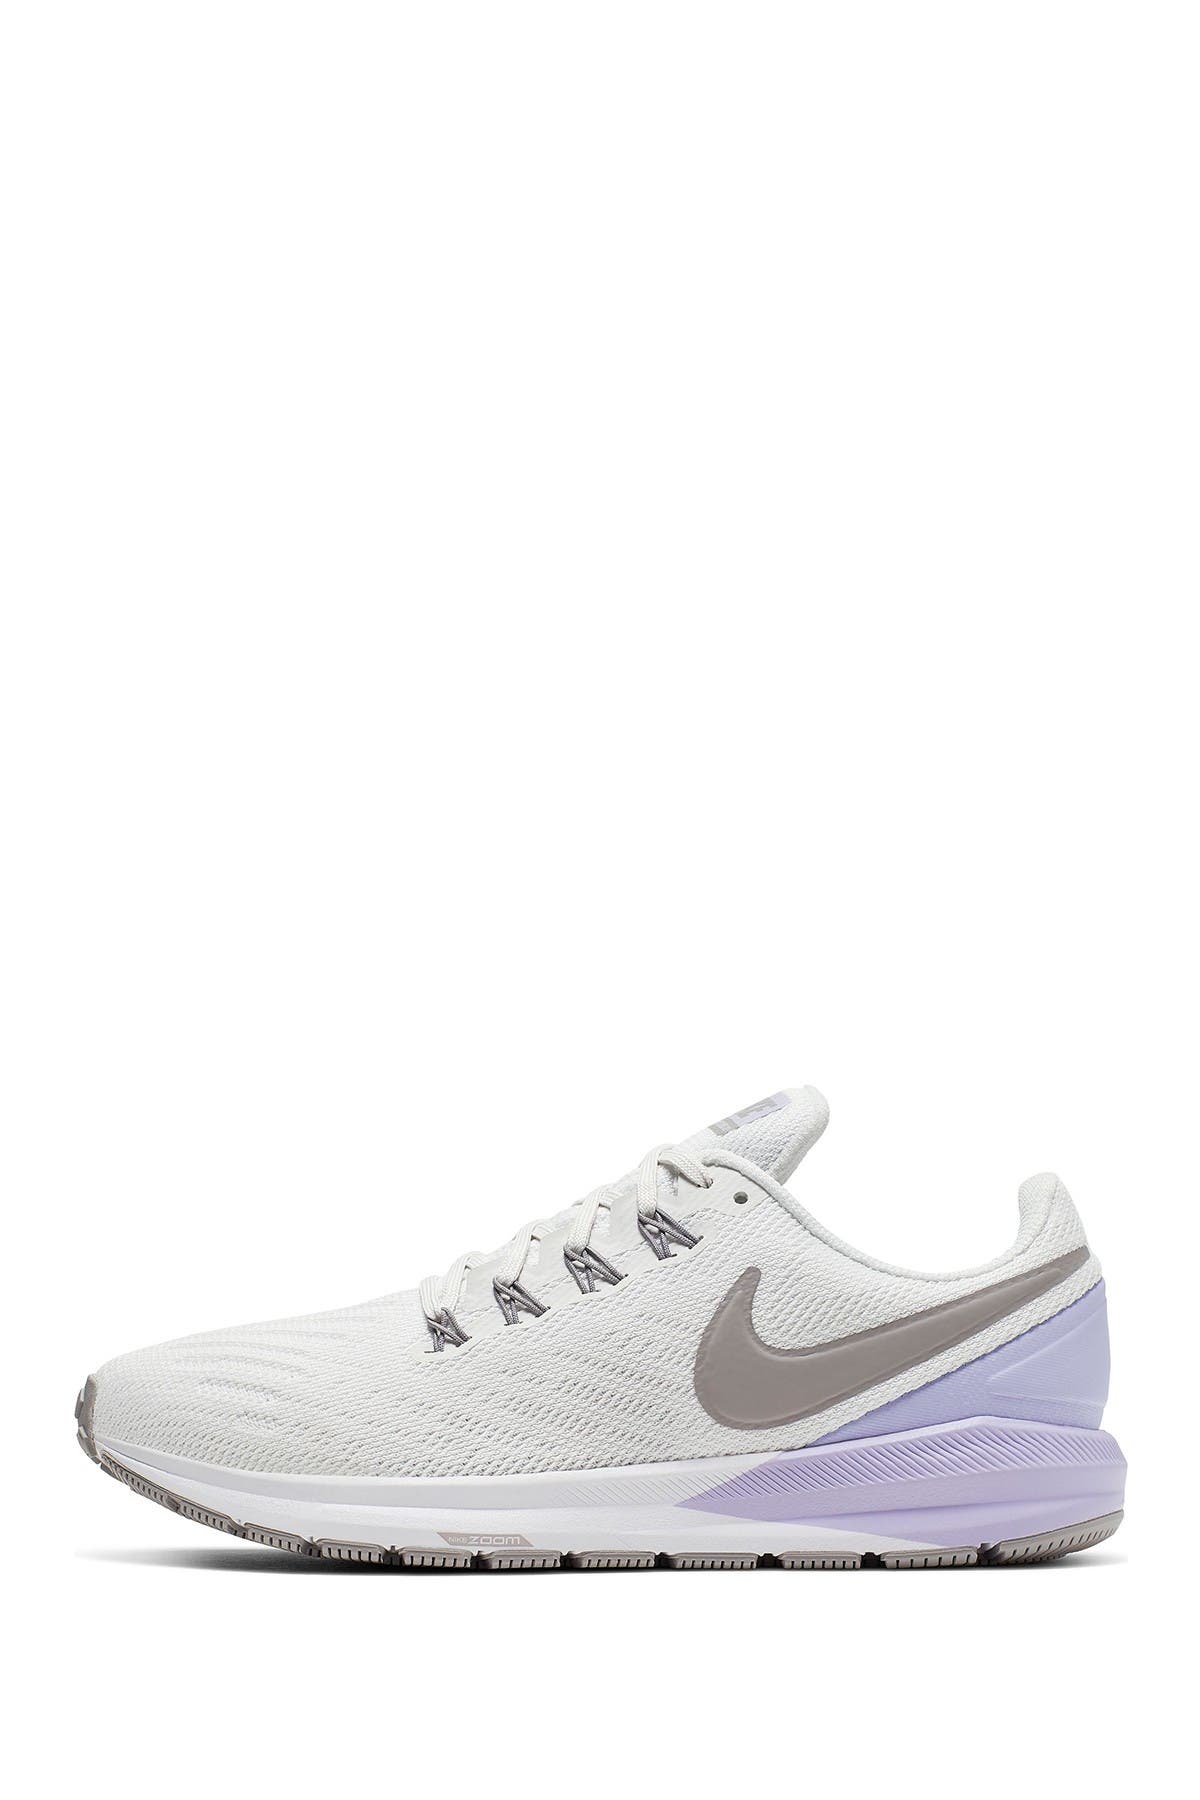 nike zoom structure 22 womens